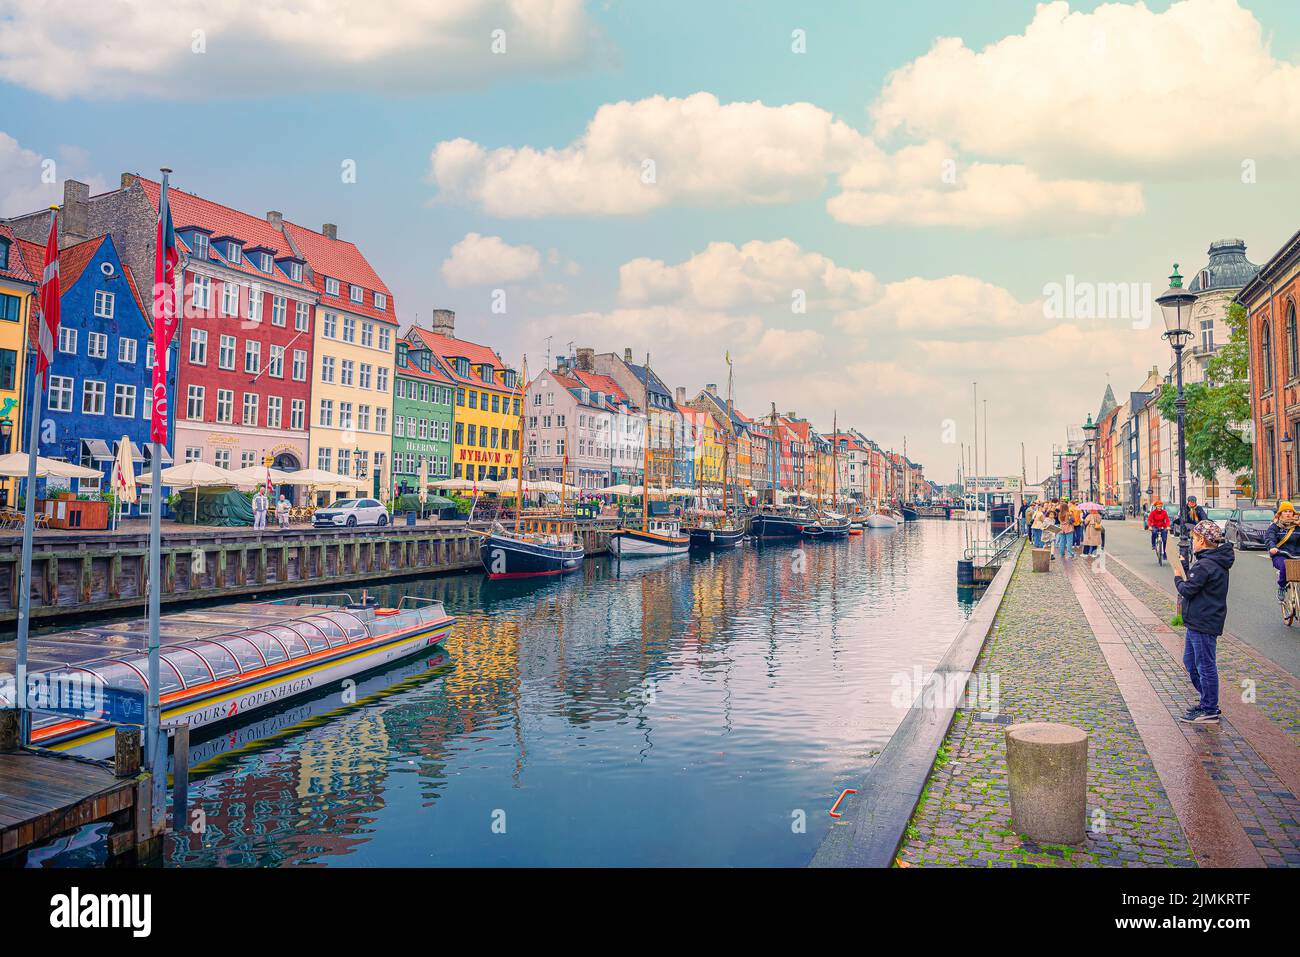 People walk on the Nyhavn street - a popular place for walking with many boats and colorful houses in Copenhagen, Denmark Stock Photo